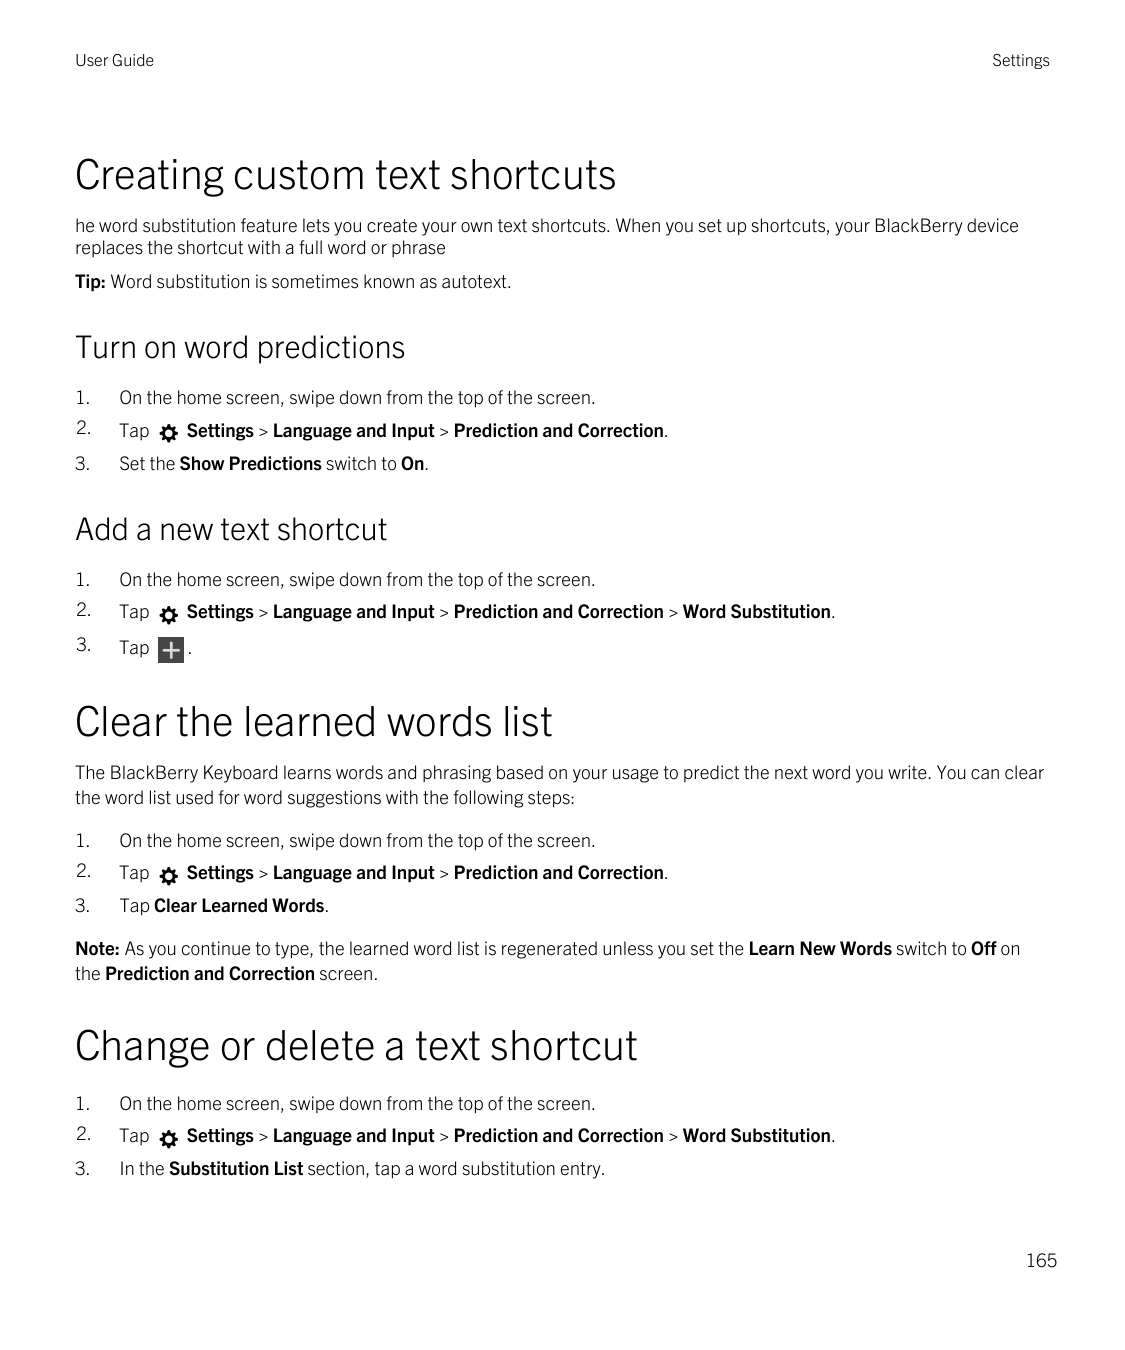 User GuideSettingsCreating custom text shortcutshe word substitution feature lets you create your own text shortcuts. When you s